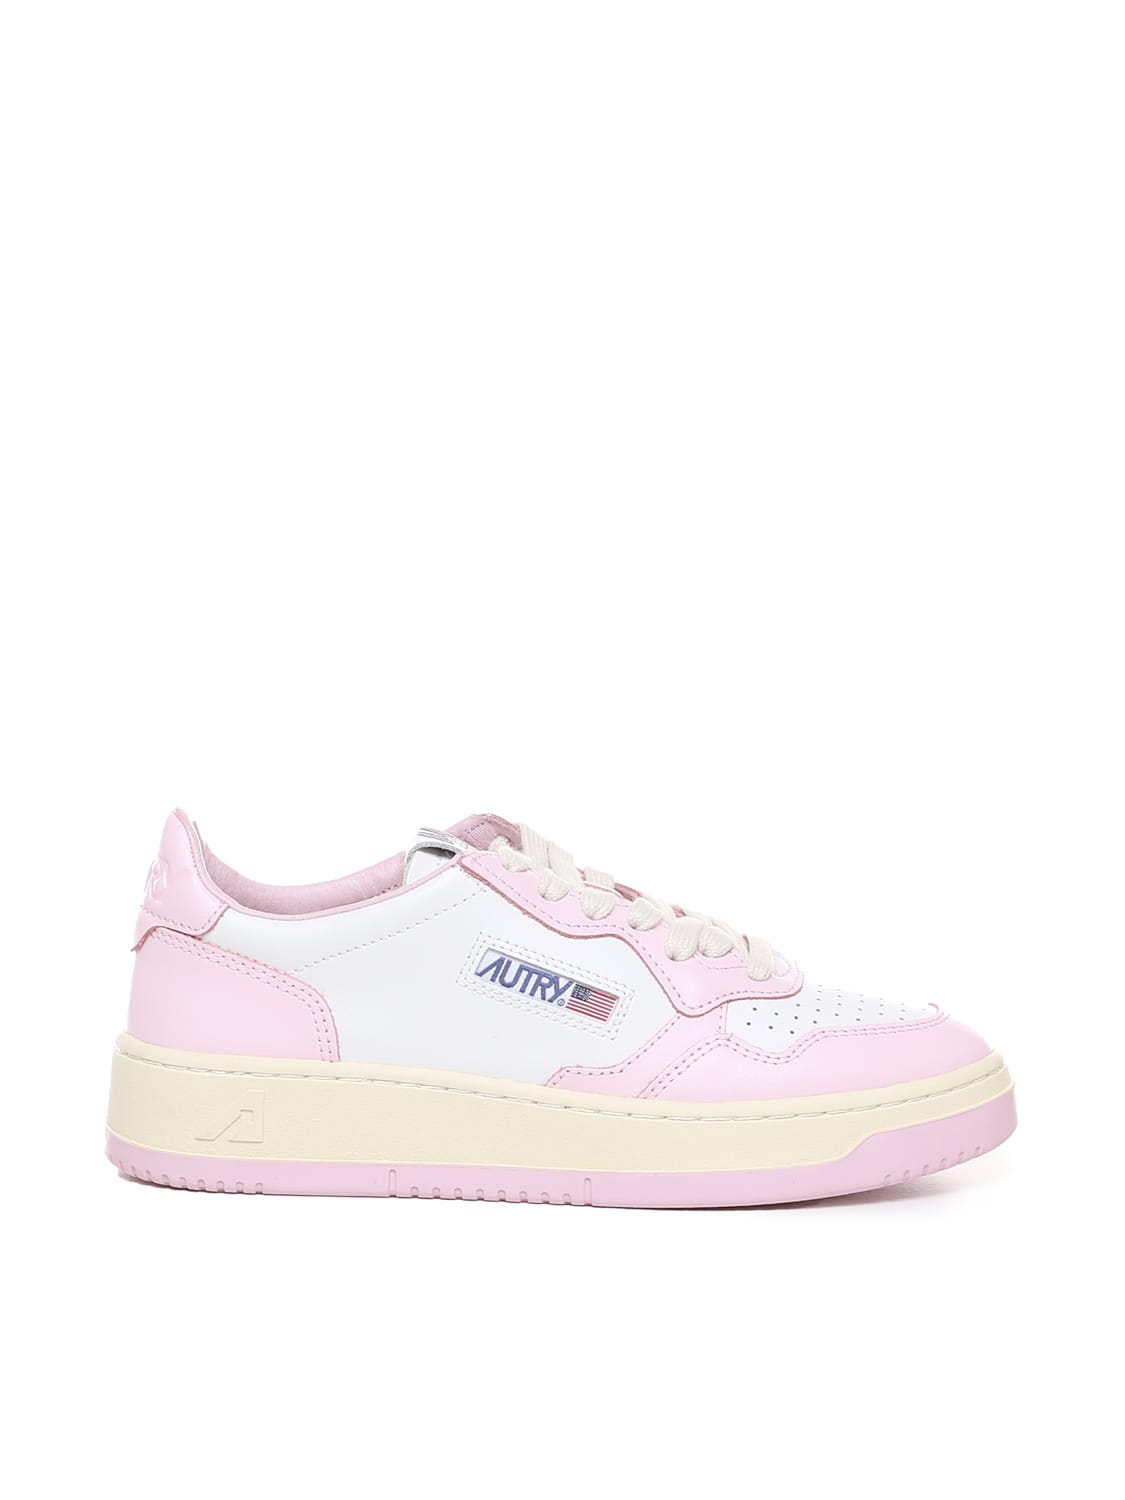 Autry Sneakers Medalist Basse In Pelle Bicolore In White, Pink